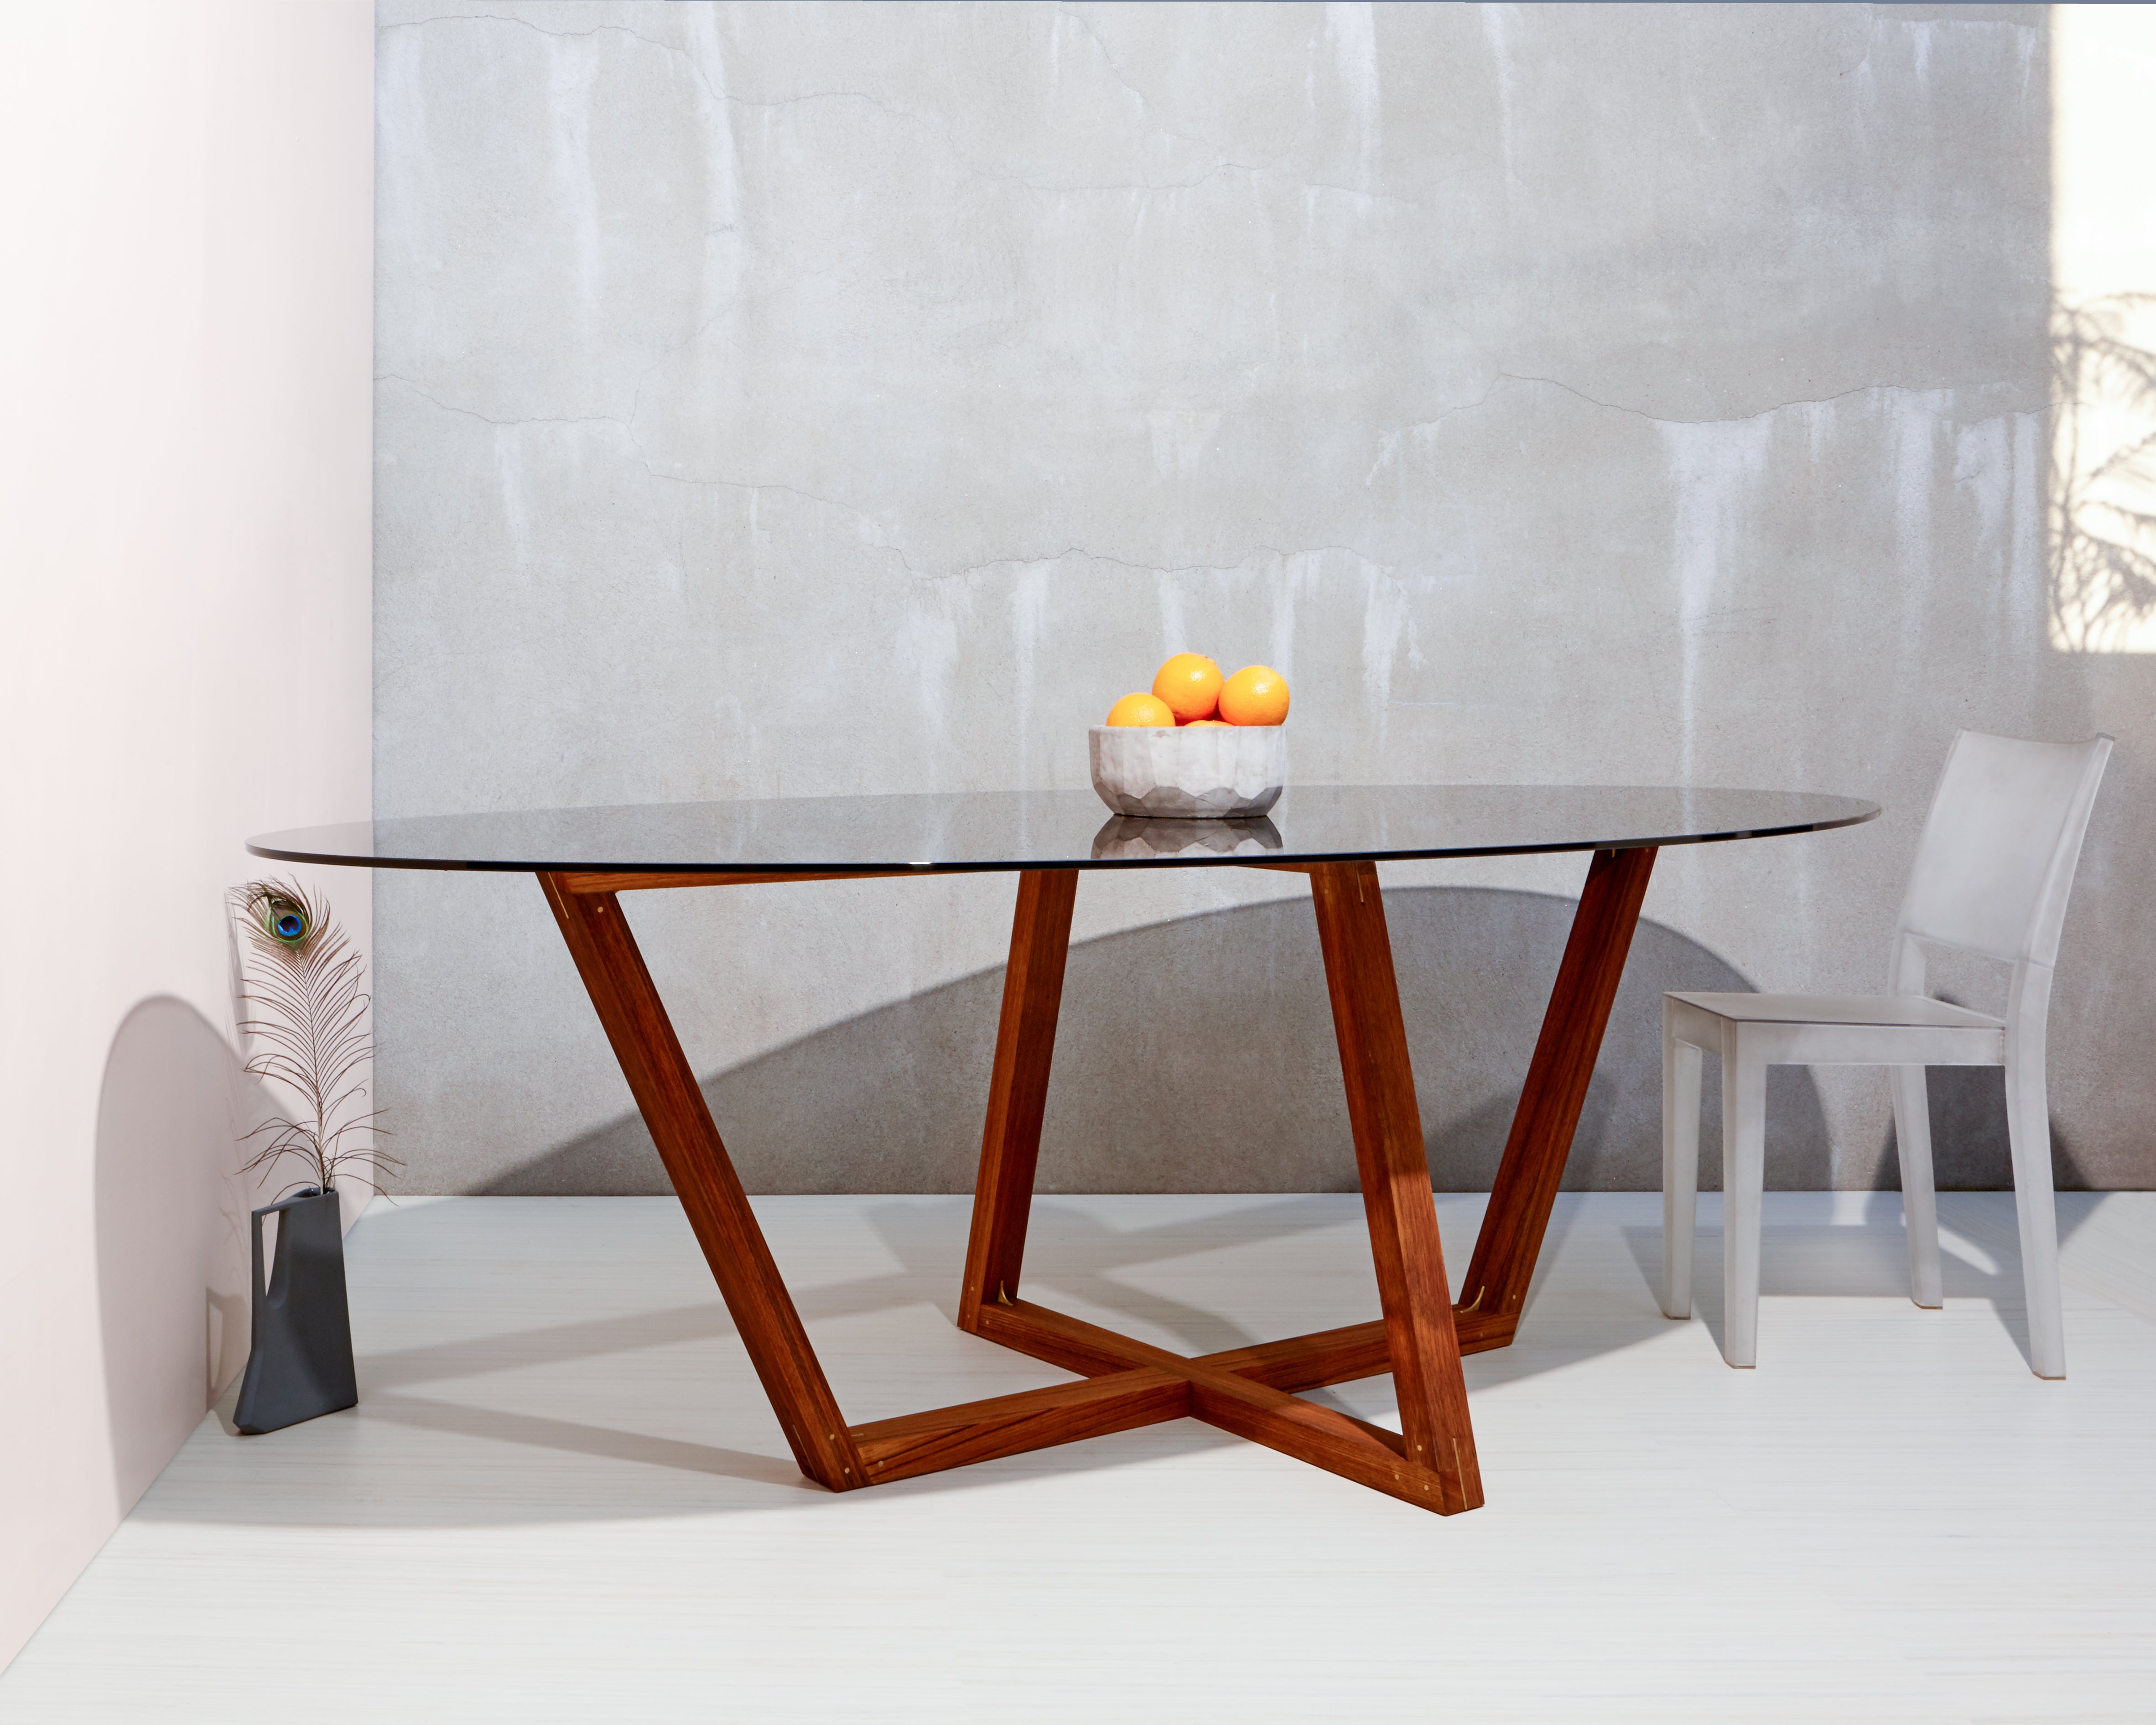 Trapezoidal forms of the finest teak interconnect in a dance of inverted symmetry beneath the smokey glass oval top.  Every view is different as you travel around the room creating a standout centerpiece for the astute collector looking for a bold